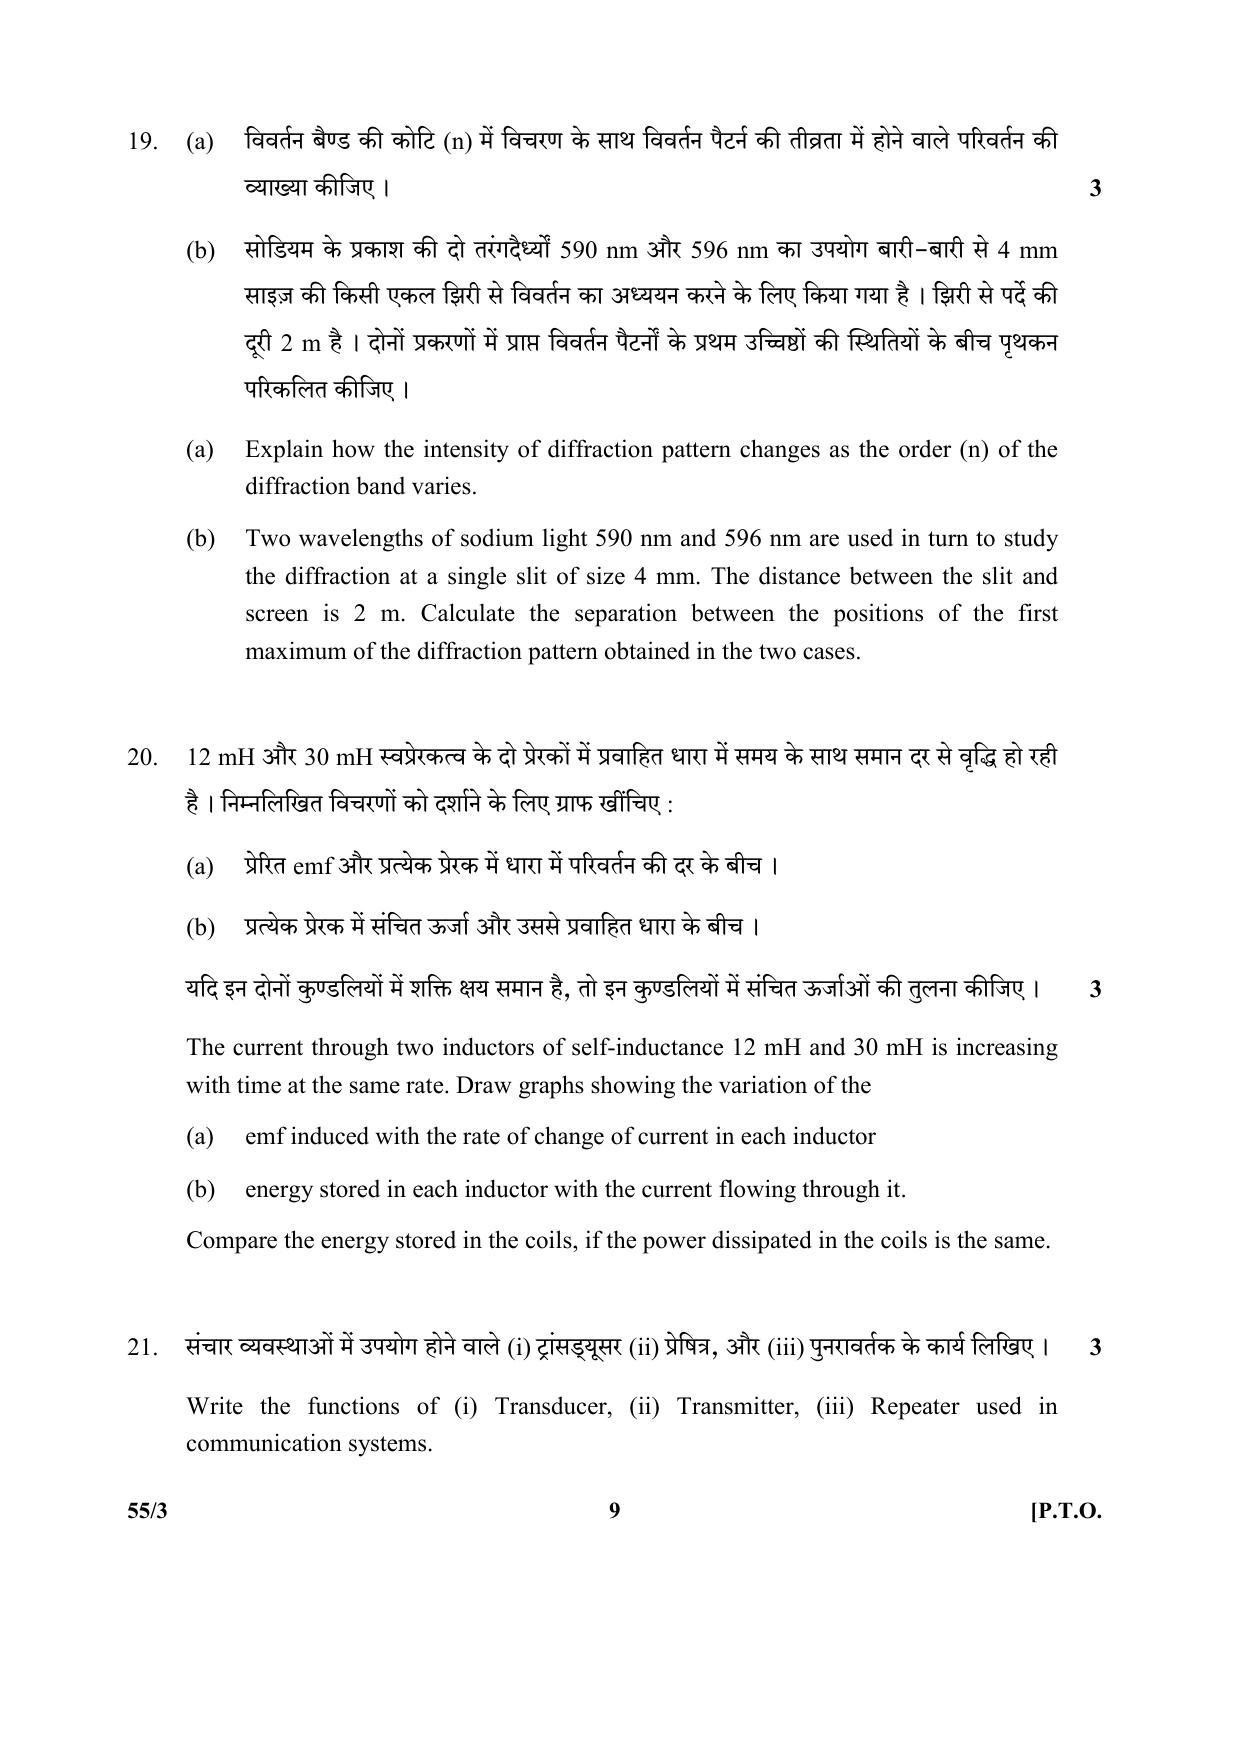 CBSE Class 12 55-3 (Physics) 2017-comptt Question Paper - Page 9